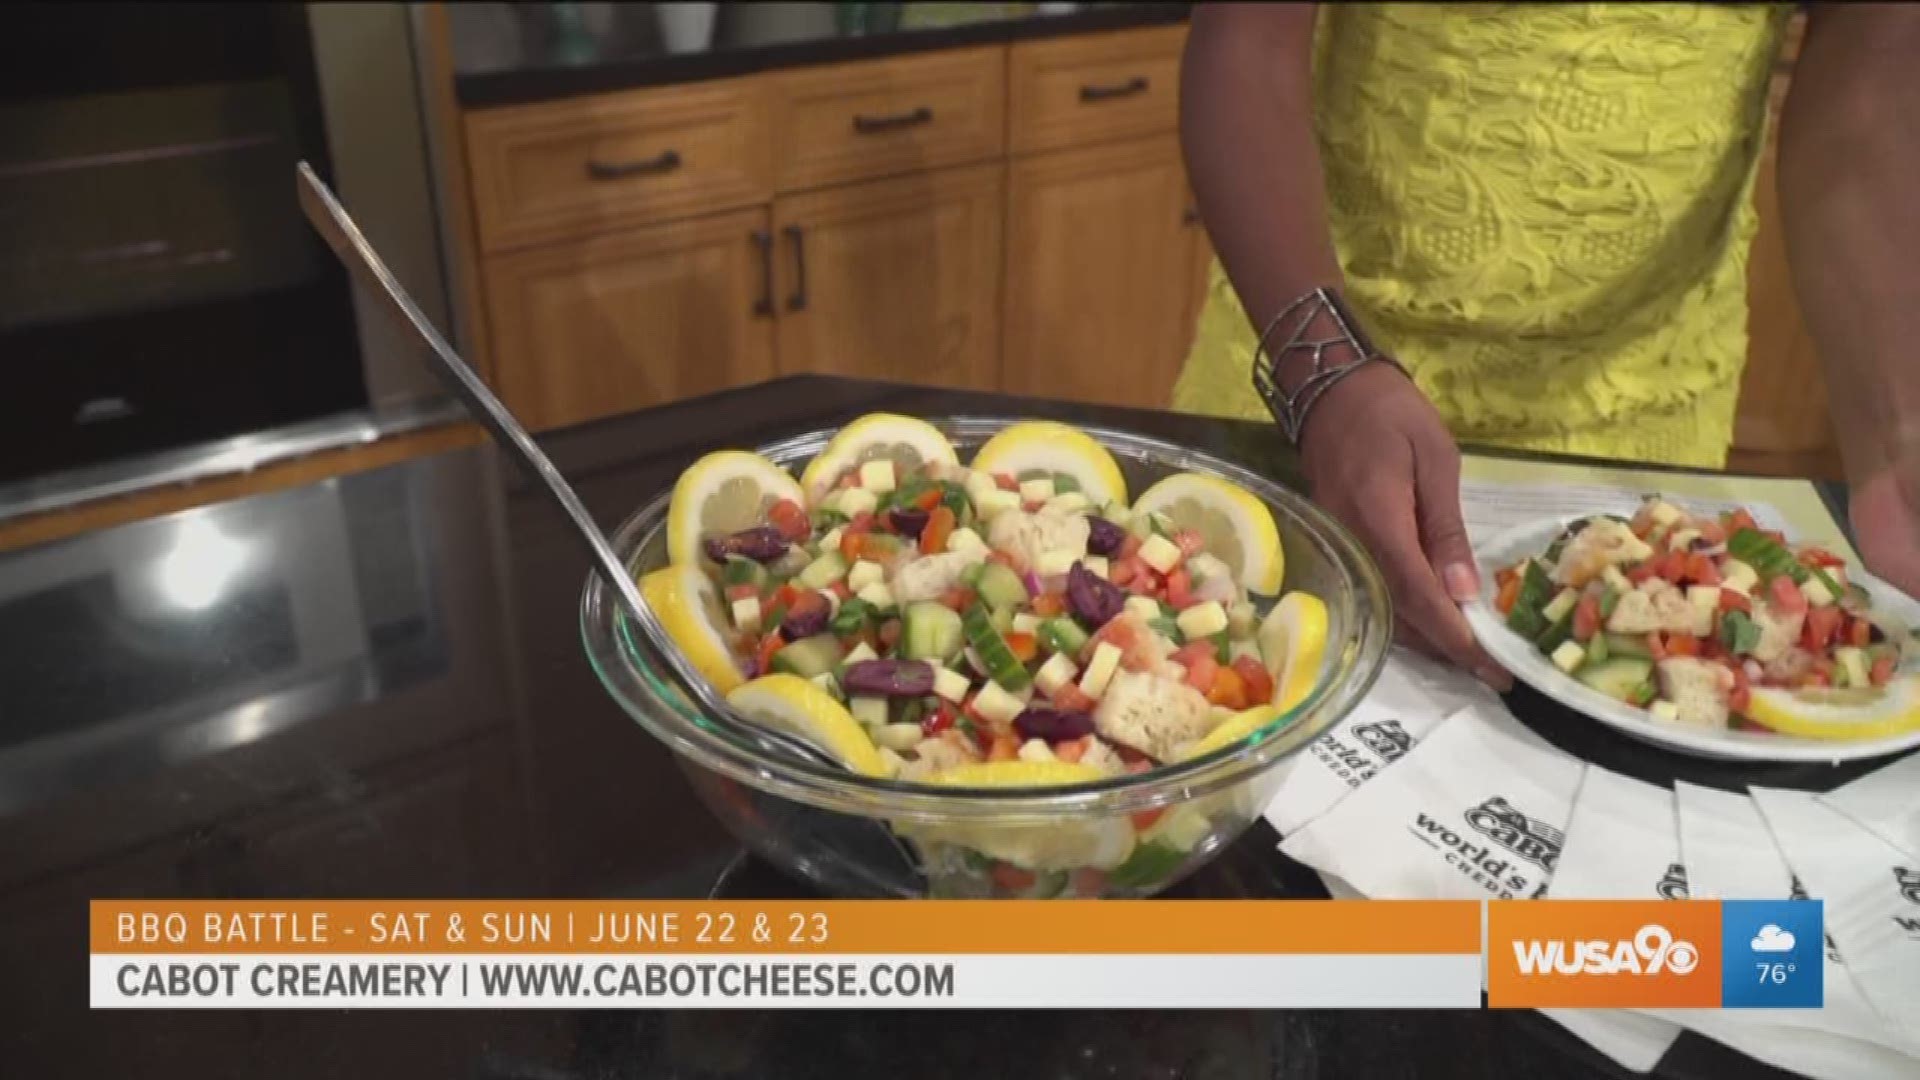 Cabot Creamery teaches us how to make a summer bread salad which highlights their Vermont sharp cheddar cheese. Cabot Creamery will be at the BBQ Battle June 22 and 23 on Pennsylvania Ave. between 3rd and 7th streets. To purchase Cabot Creamery products, head on over to www.cabotcheese.com